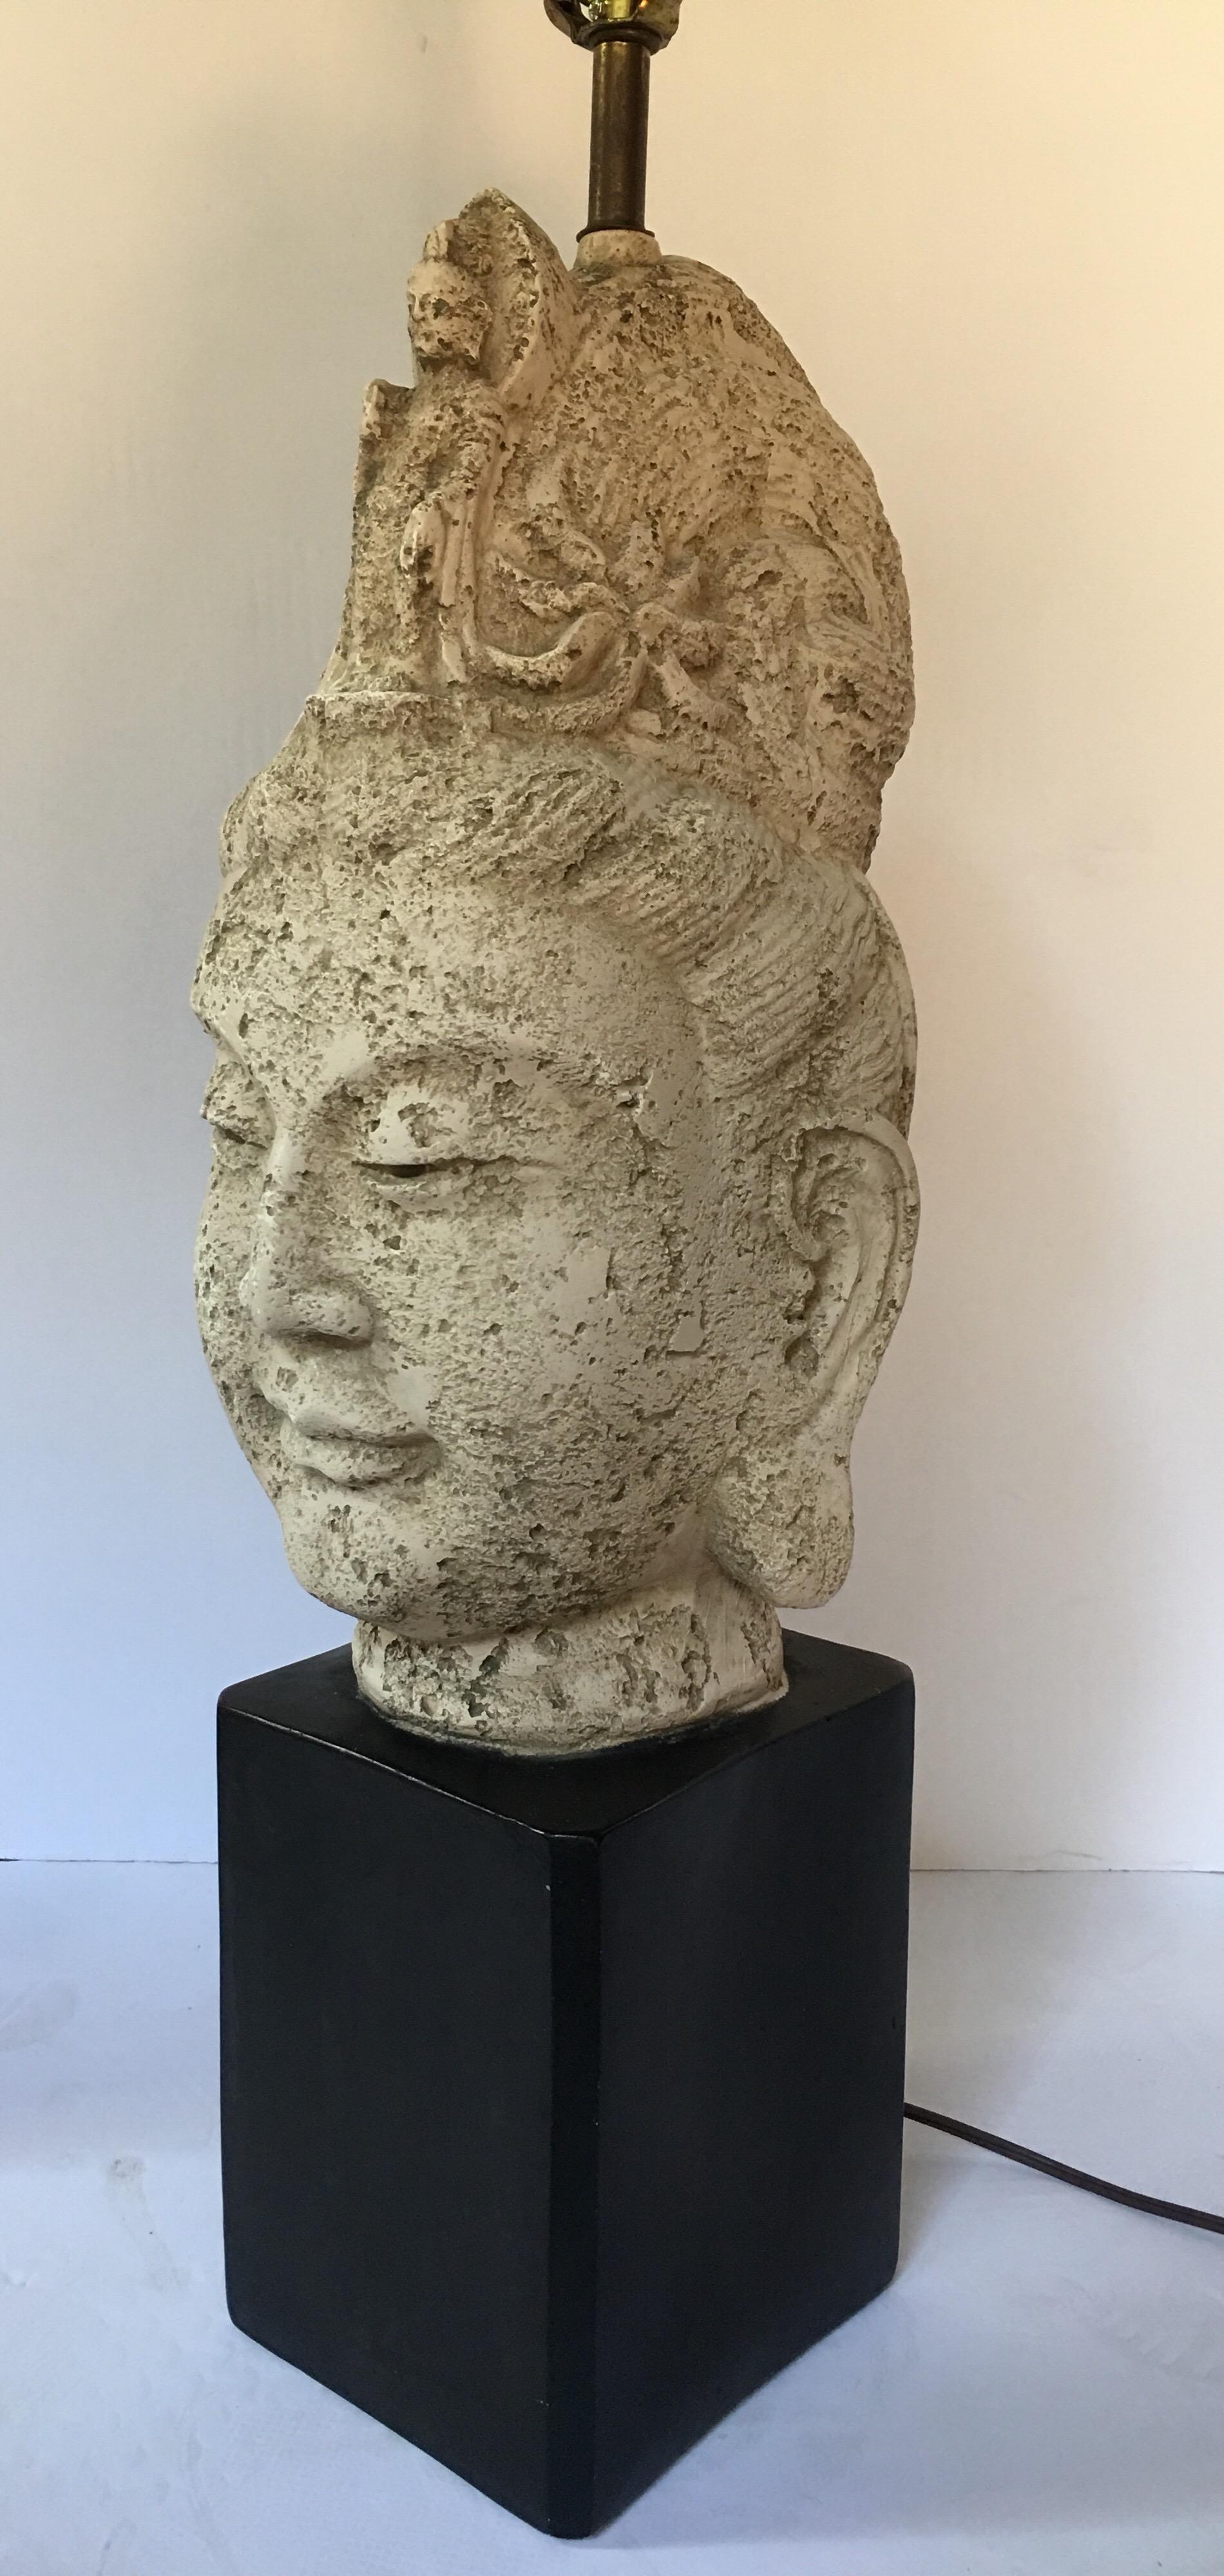 Mid-Century Modern sculptural plaster Asian Buddha head bust table lamp in the style of James Mont. Textural grey faux stone finish. Lampshade not included. Measures: 29.5 high to top of socket.